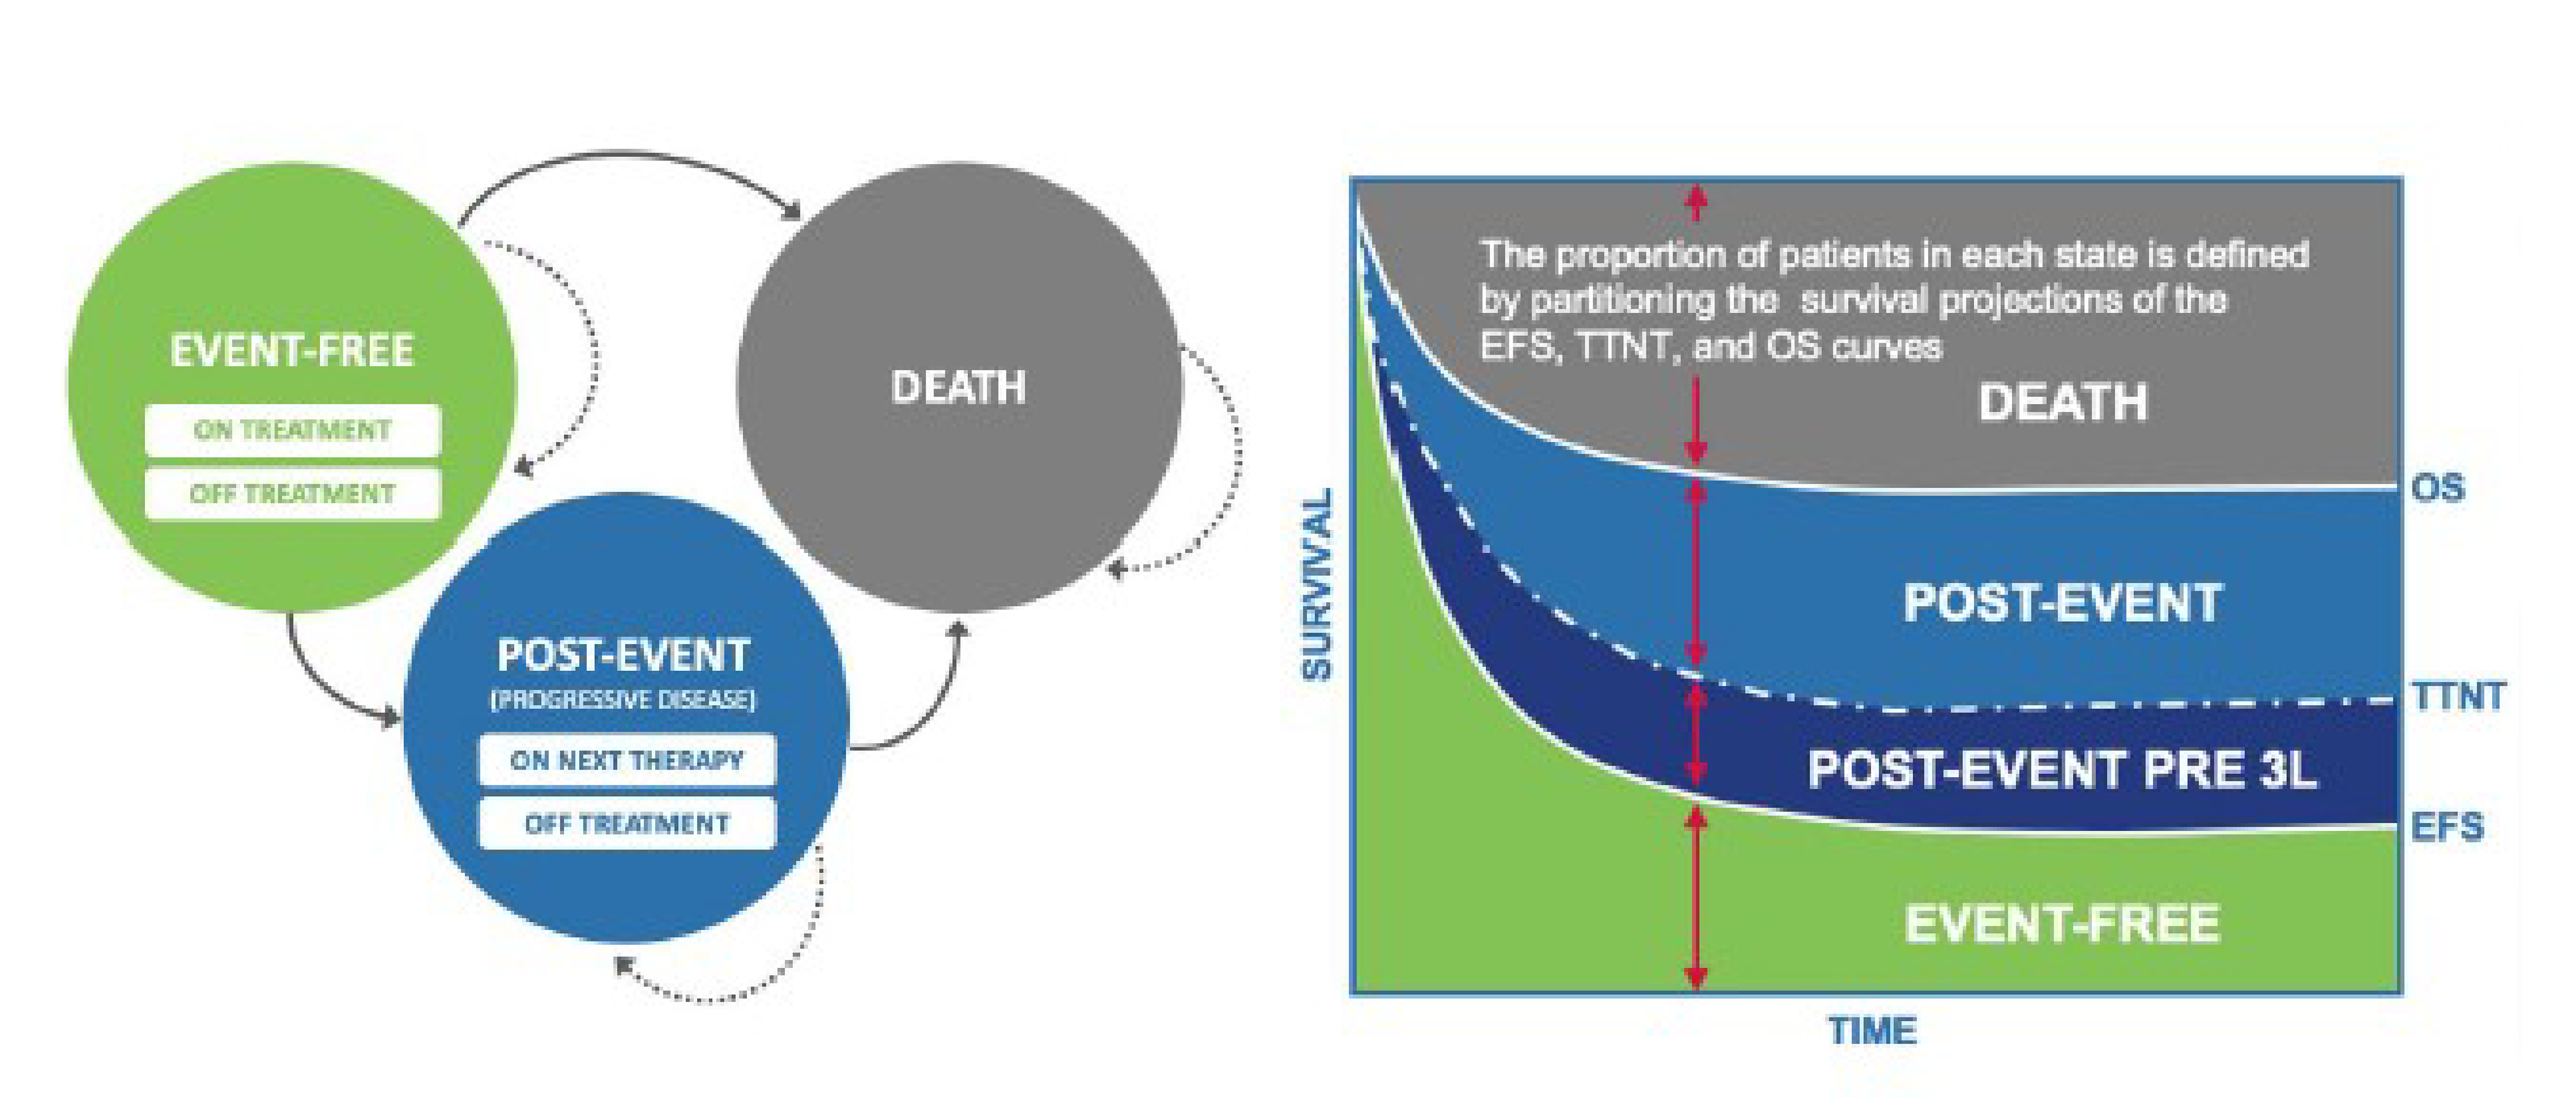 The partitioned survival model structure illustrating the 3 health states (i.e., event-free, post-event, death) within the model.